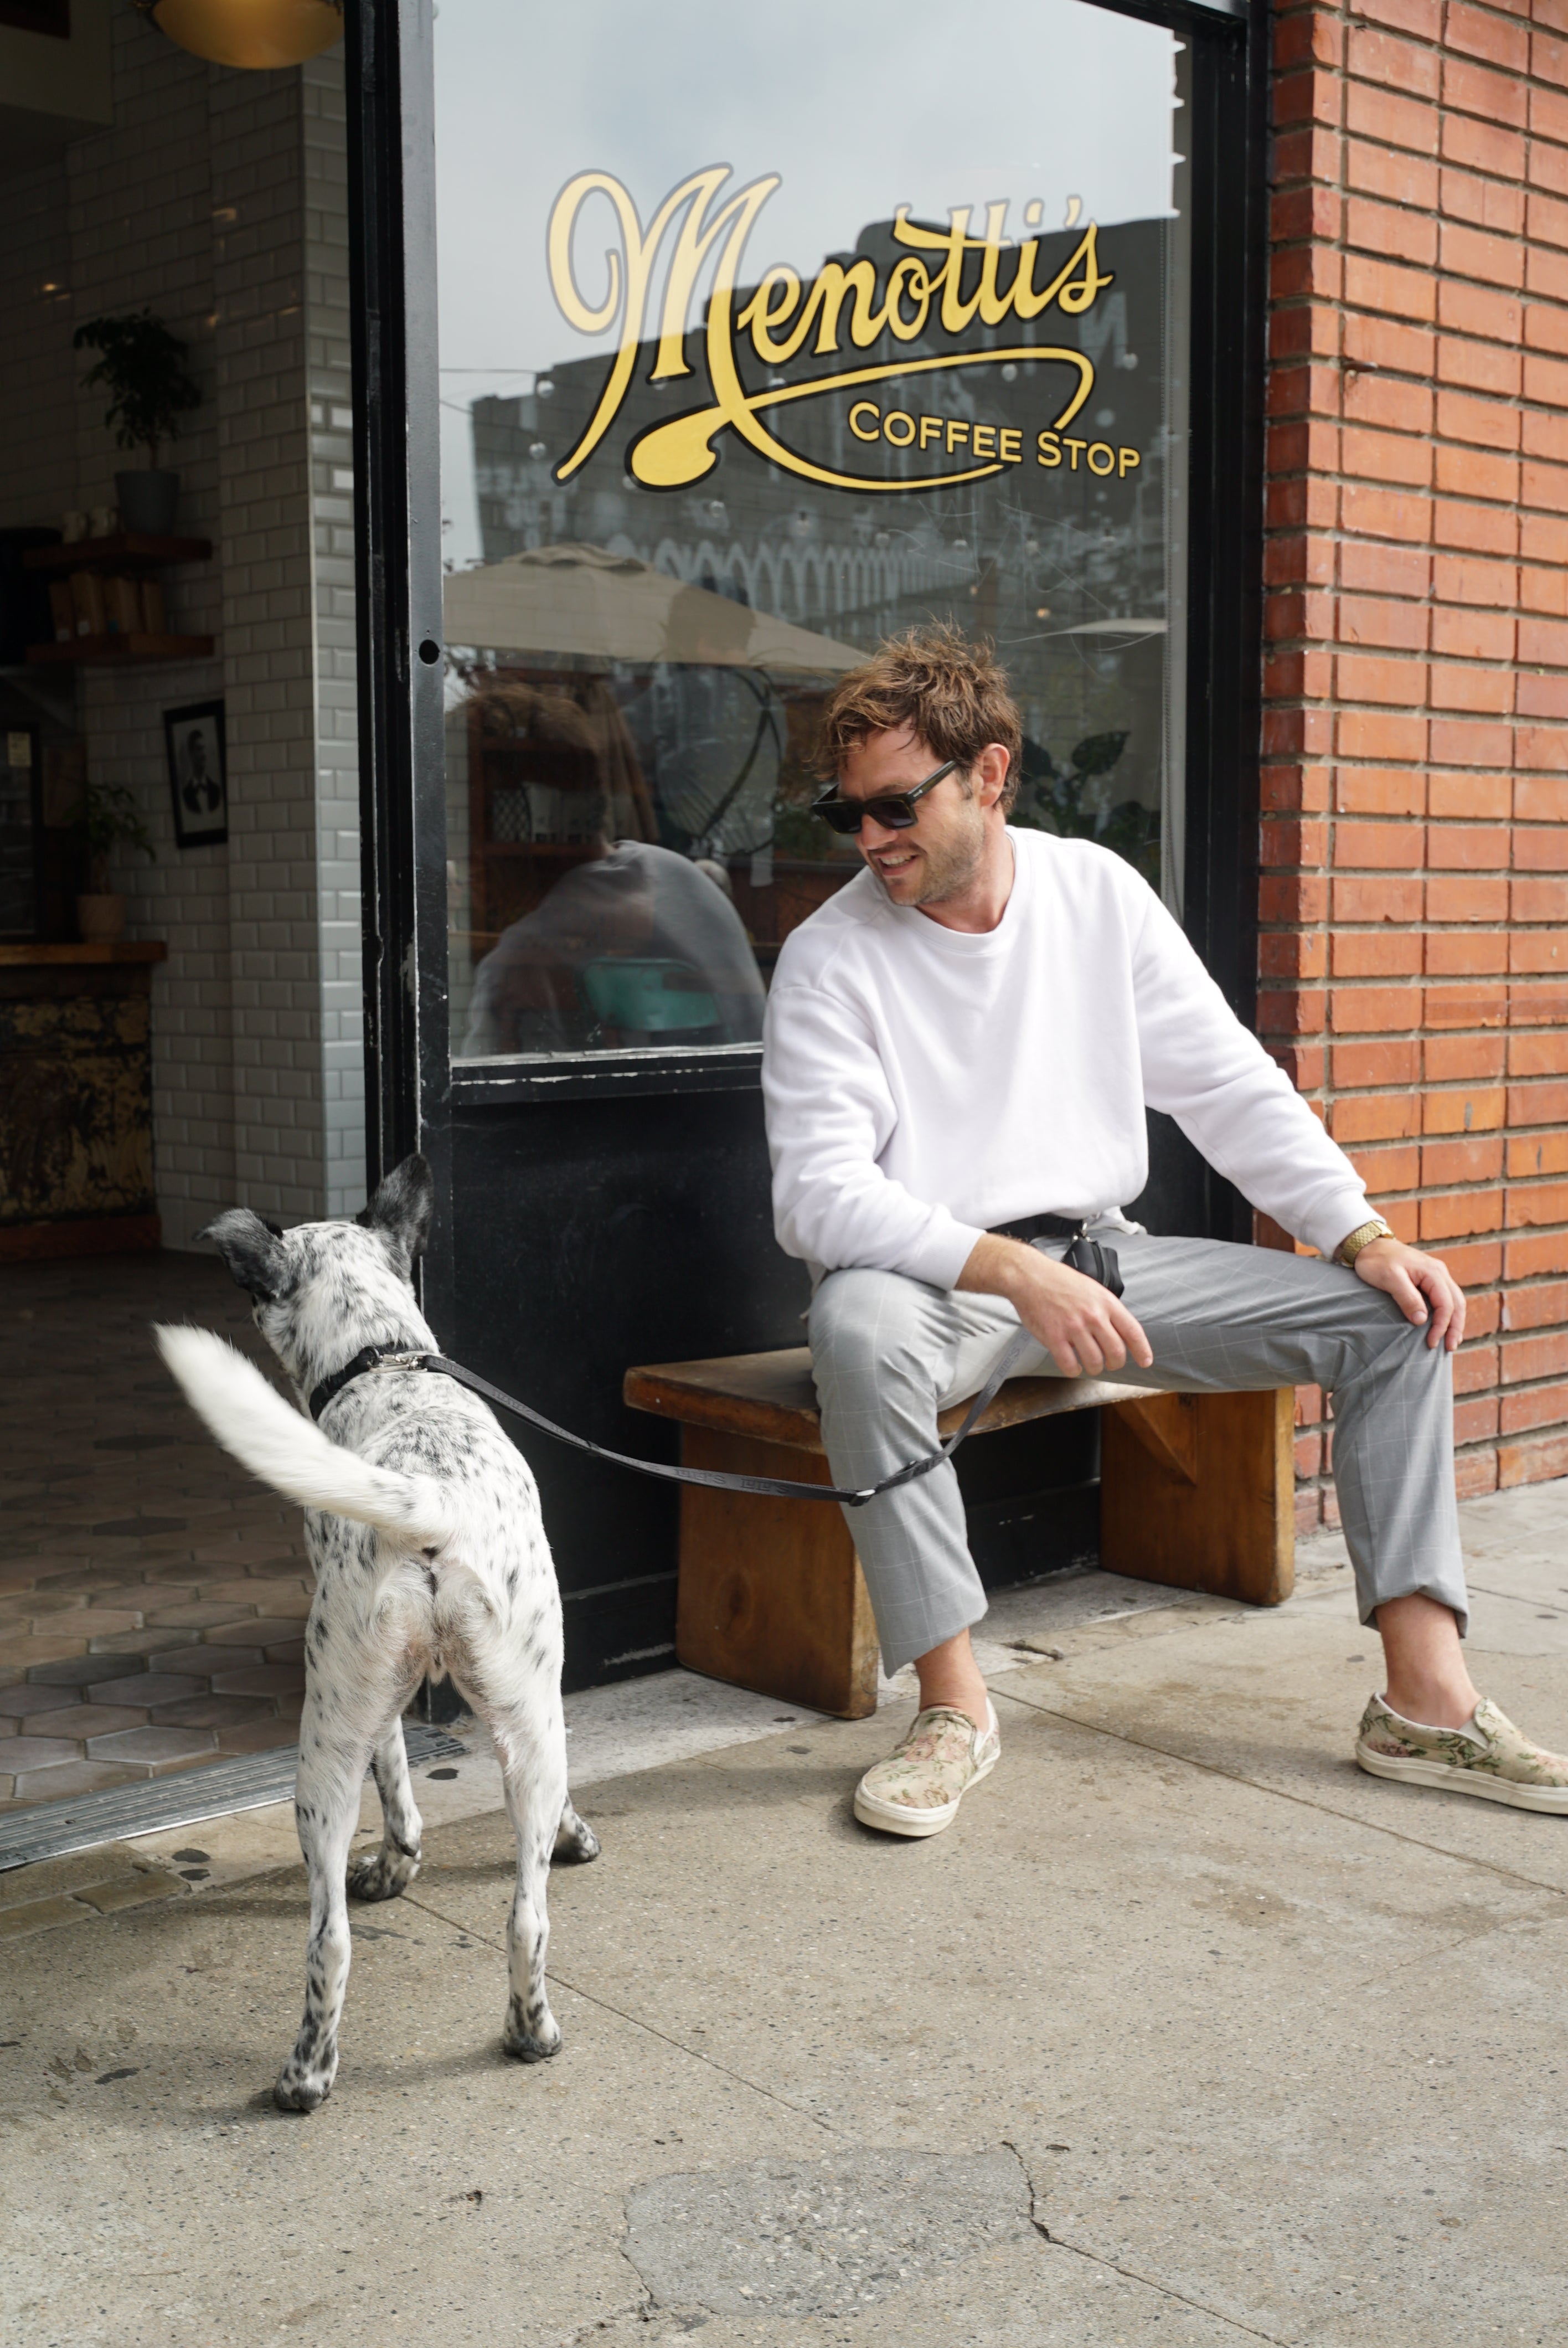 A man wearing sunglasses and a white sweatshirt sitting on a wooden bench outside Menotti's Coffee Stop, smiling at a black and white dog. The dog is on a leash from Lulu's from Cali and is looking towards the coffee shop entrance.